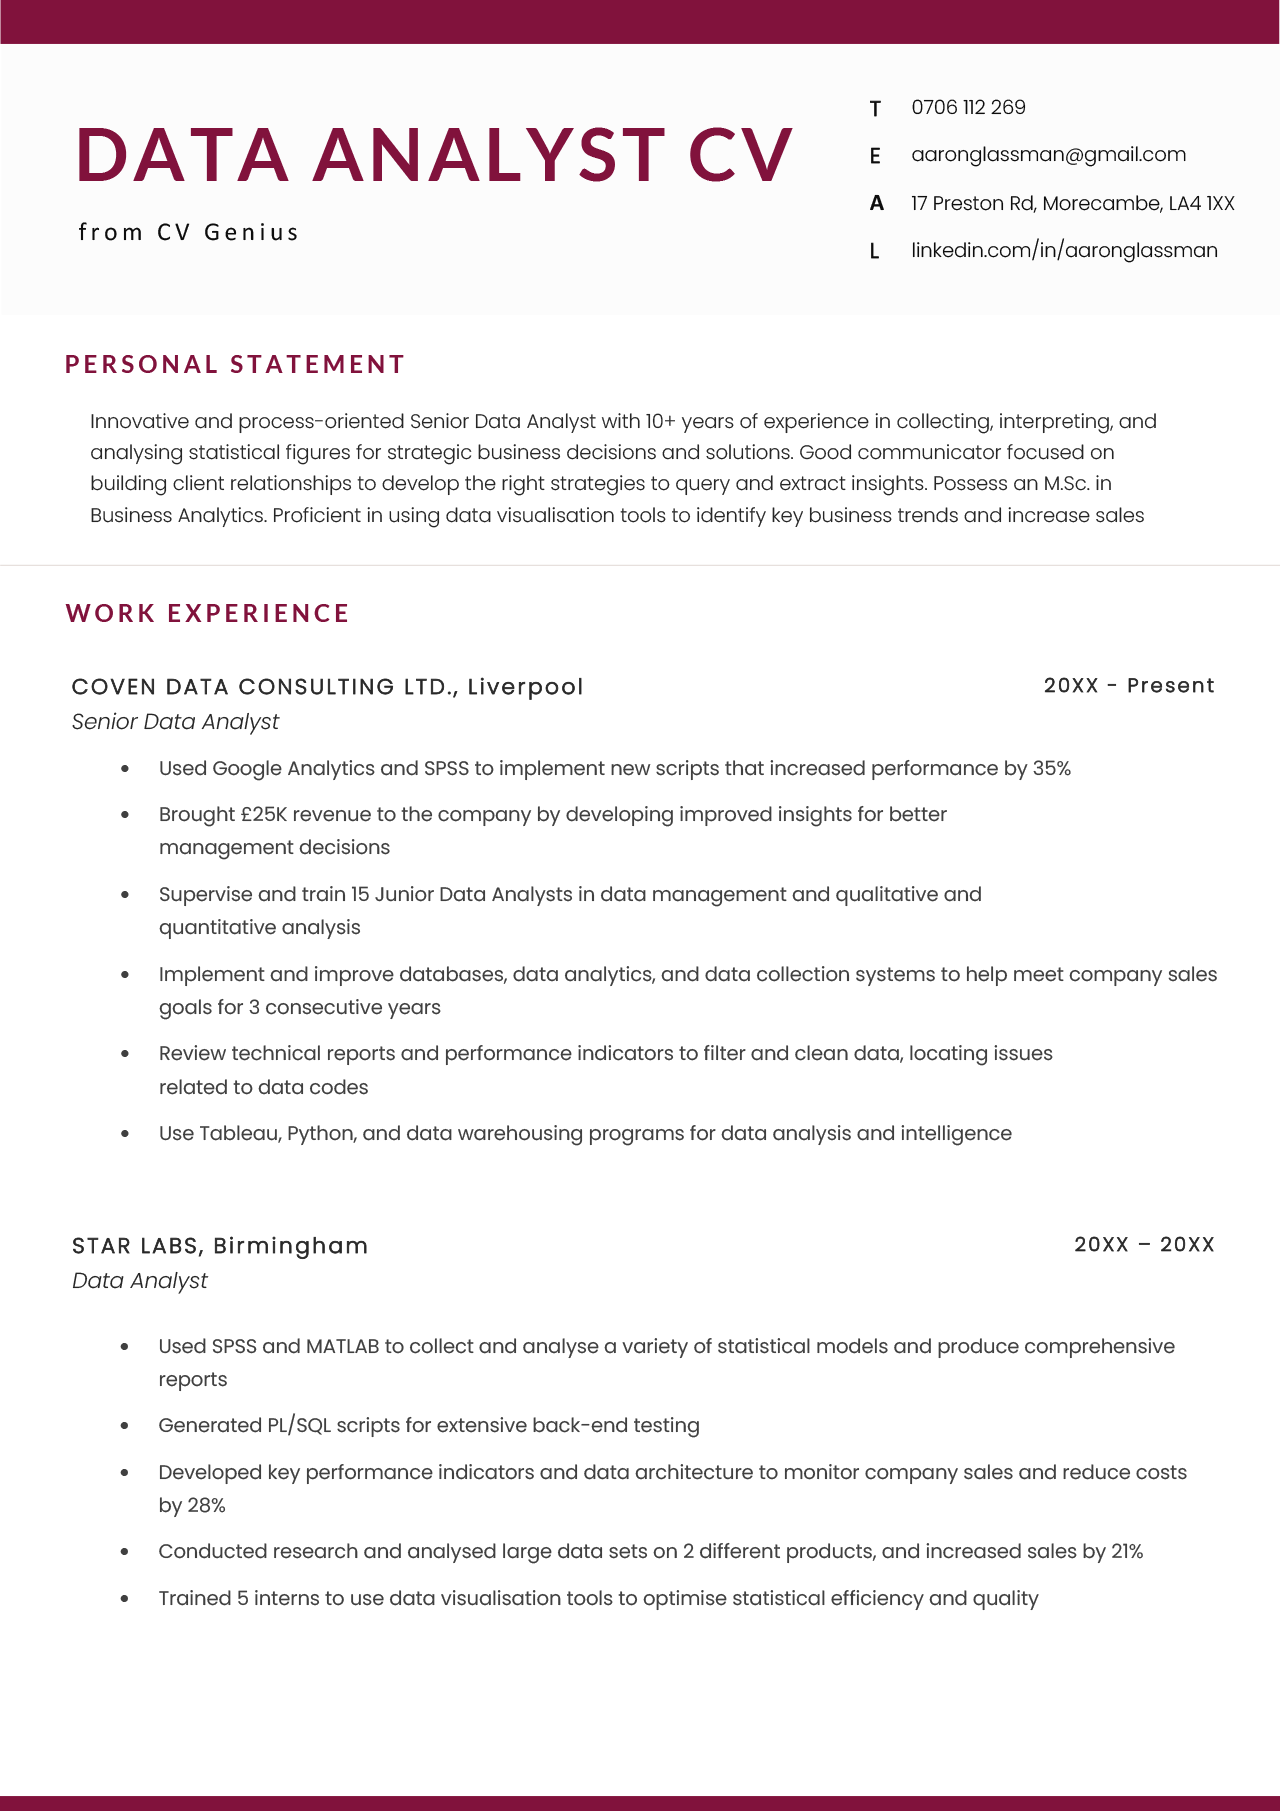 personal statement examples for data analyst